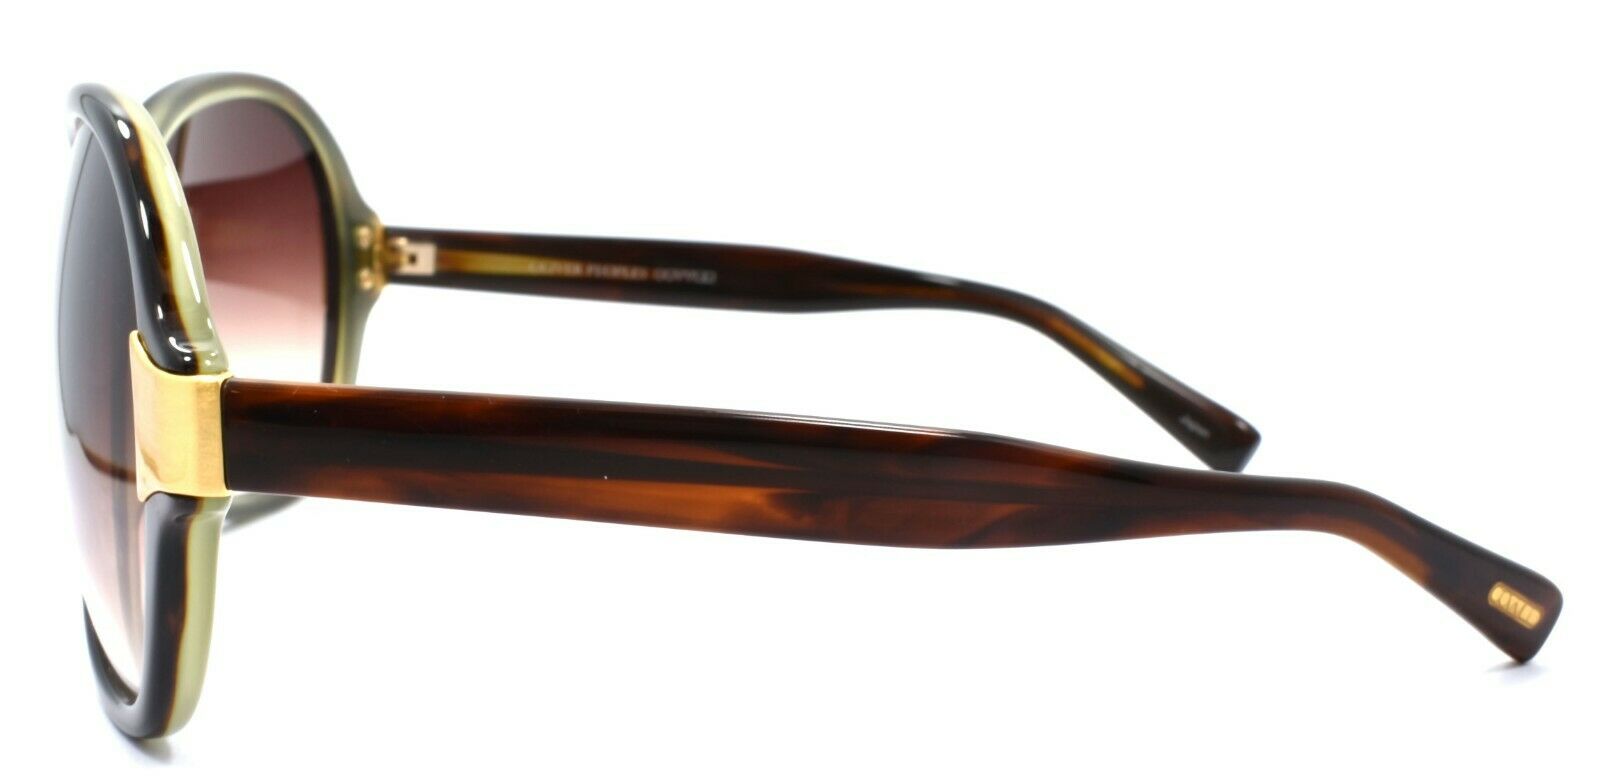 3-Oliver Peoples Leyla H Women's Sunglasses Brown Over Green / Brown Gradient &-Does not apply-IKSpecs